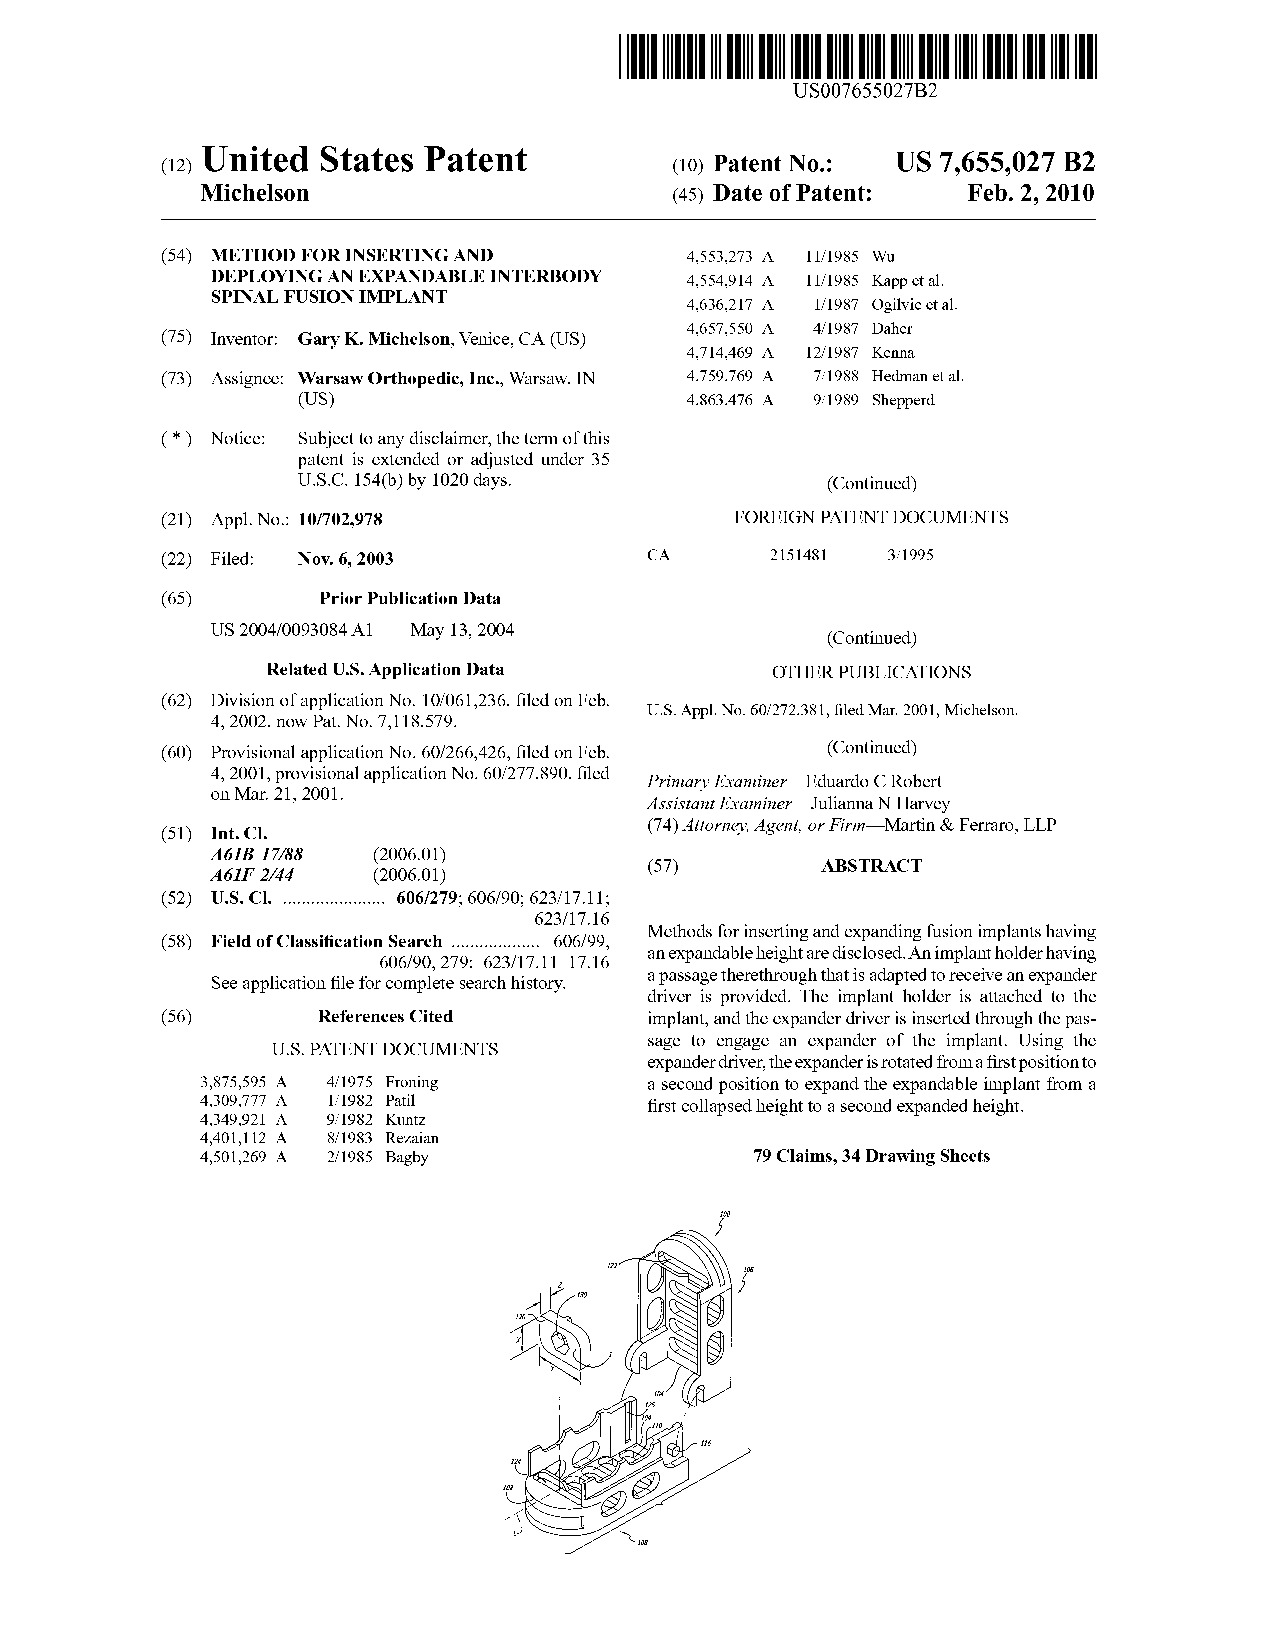 Method for inserting and deploying an expandable interbody spinal fusion     implant - Patent 7,655,027